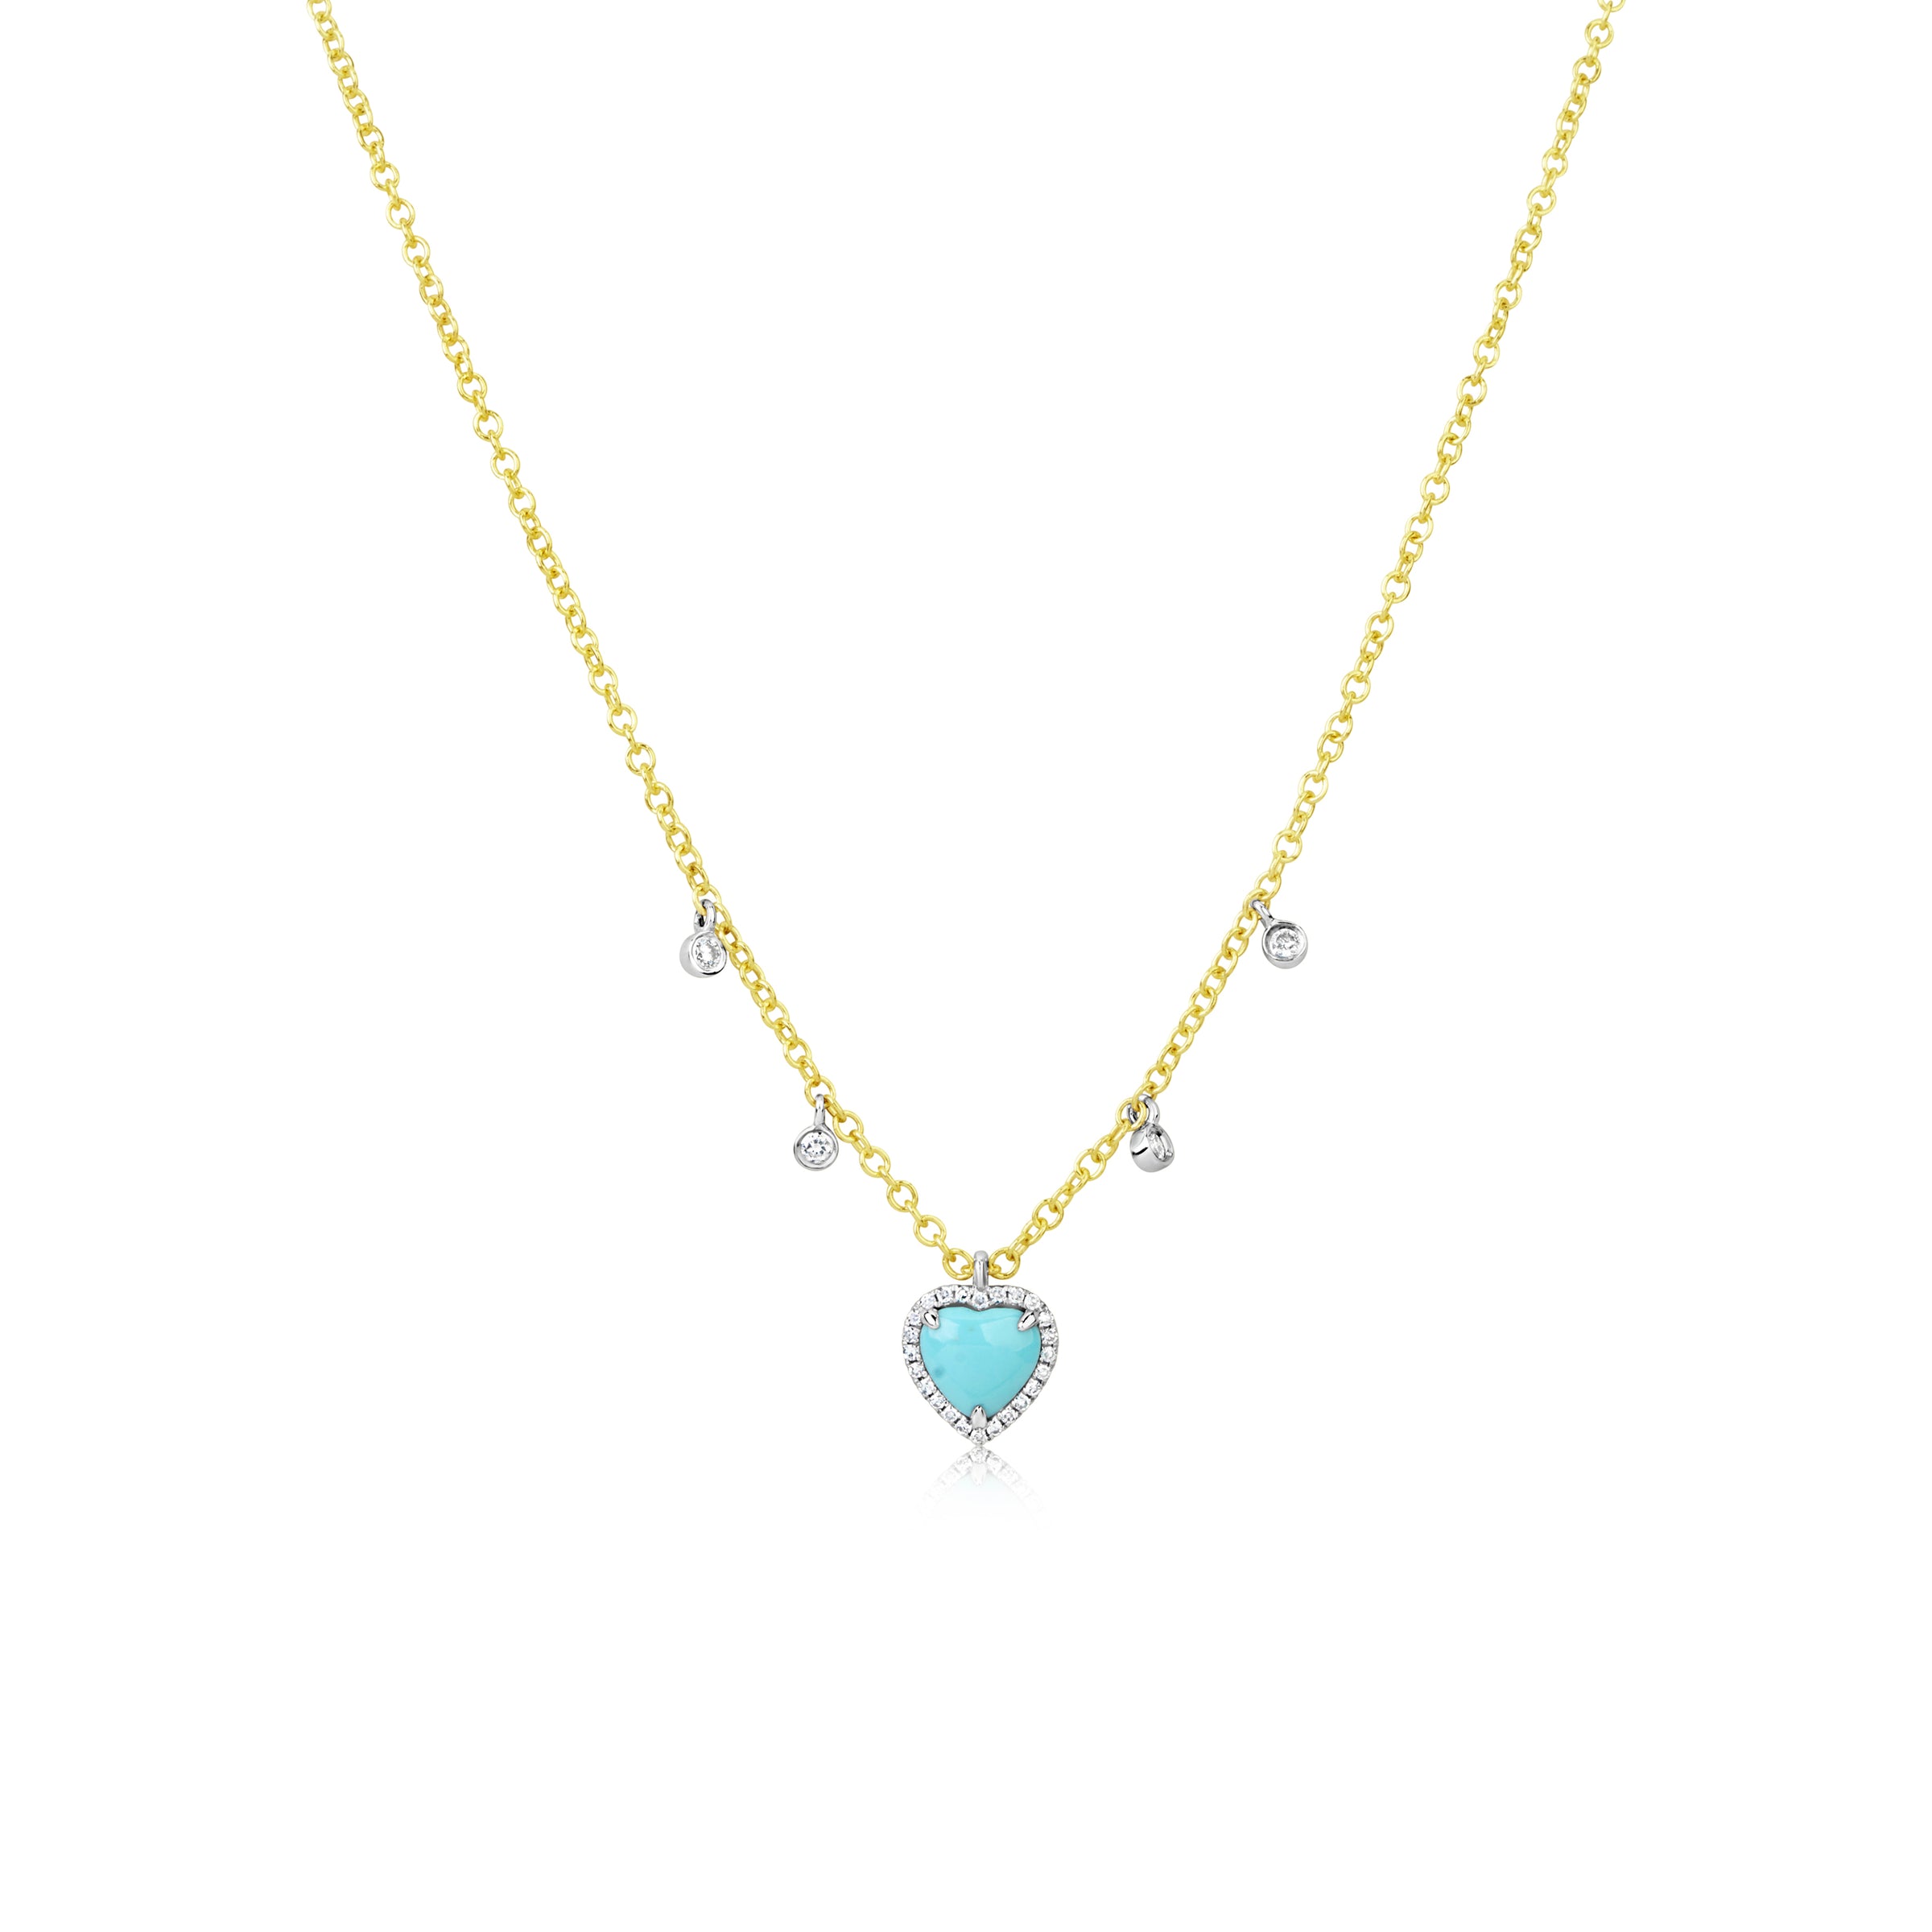 Meira T Desinger Milky Aquamarine Charm Necklace. | Metals in Time